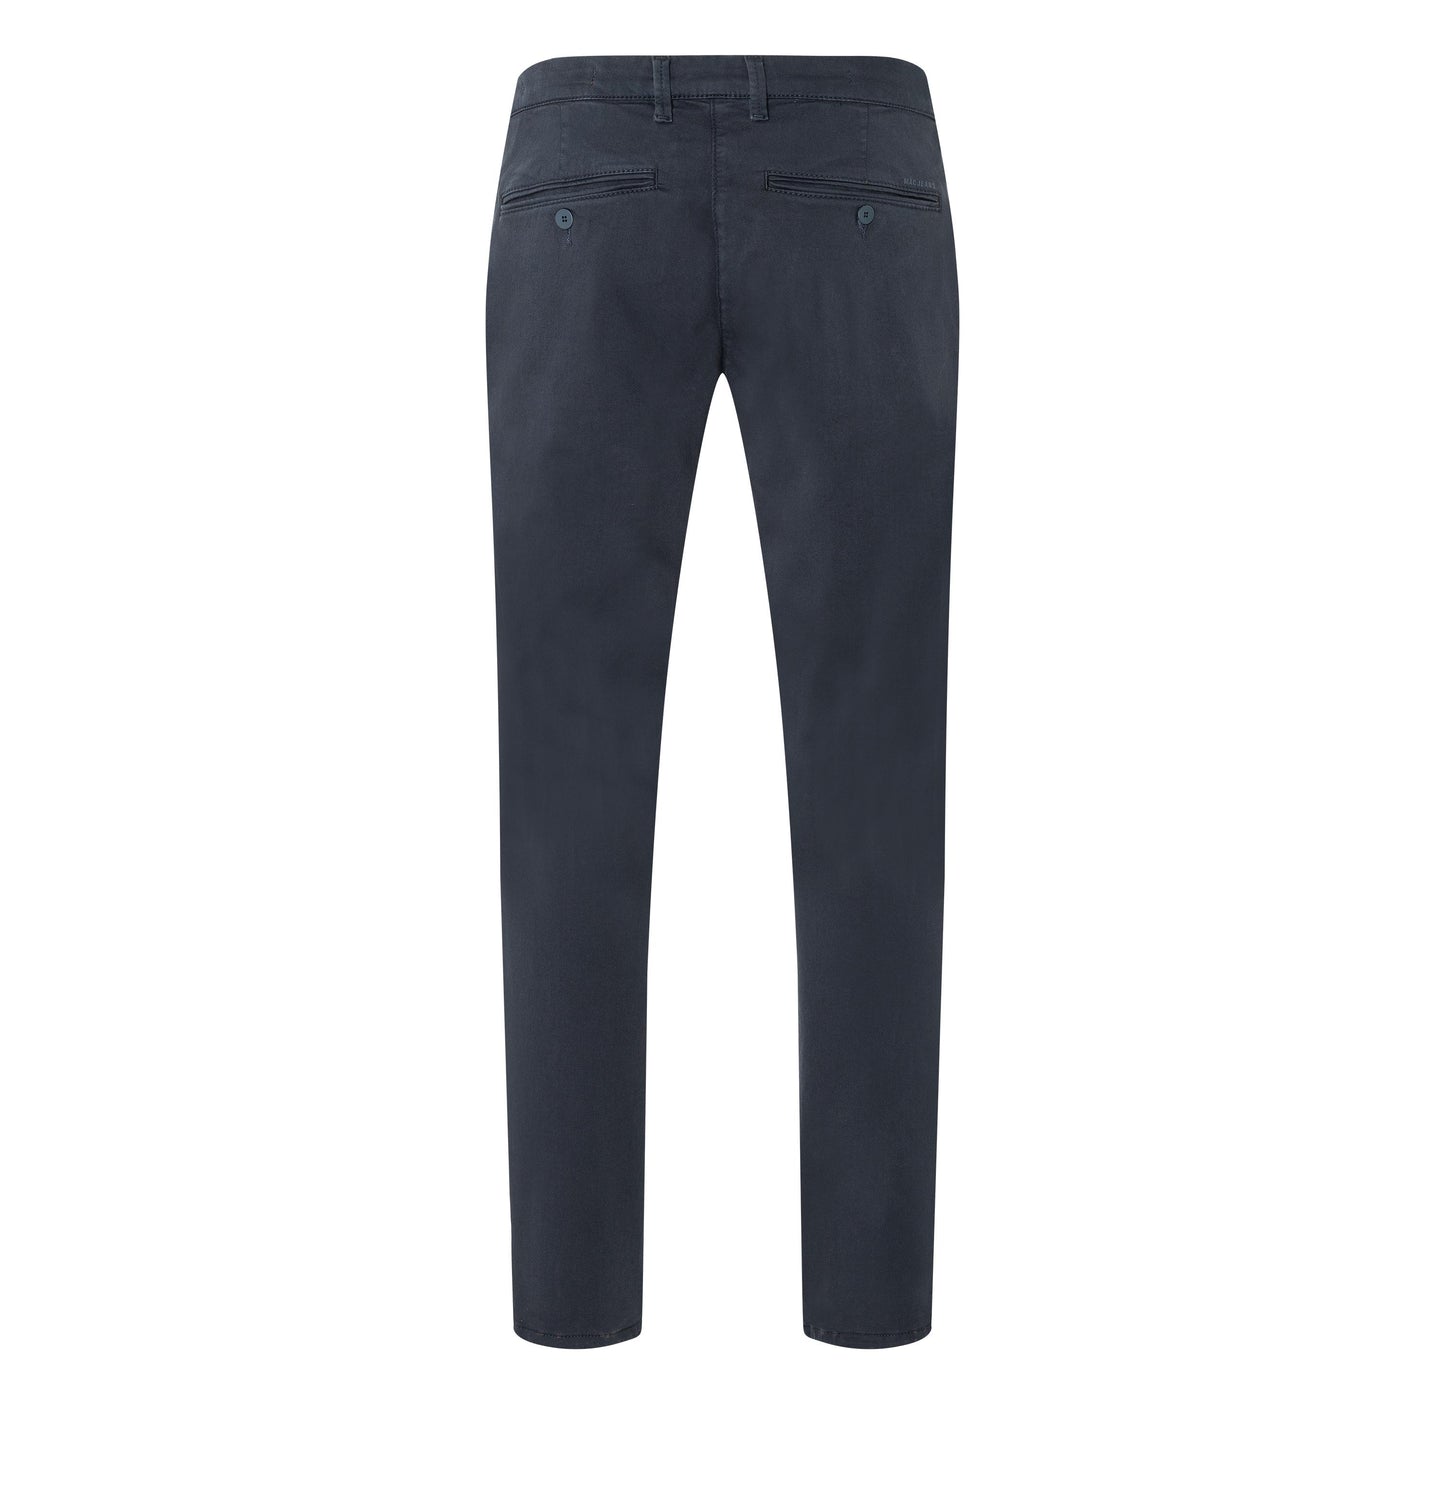 Driving Pants in navy by MAC